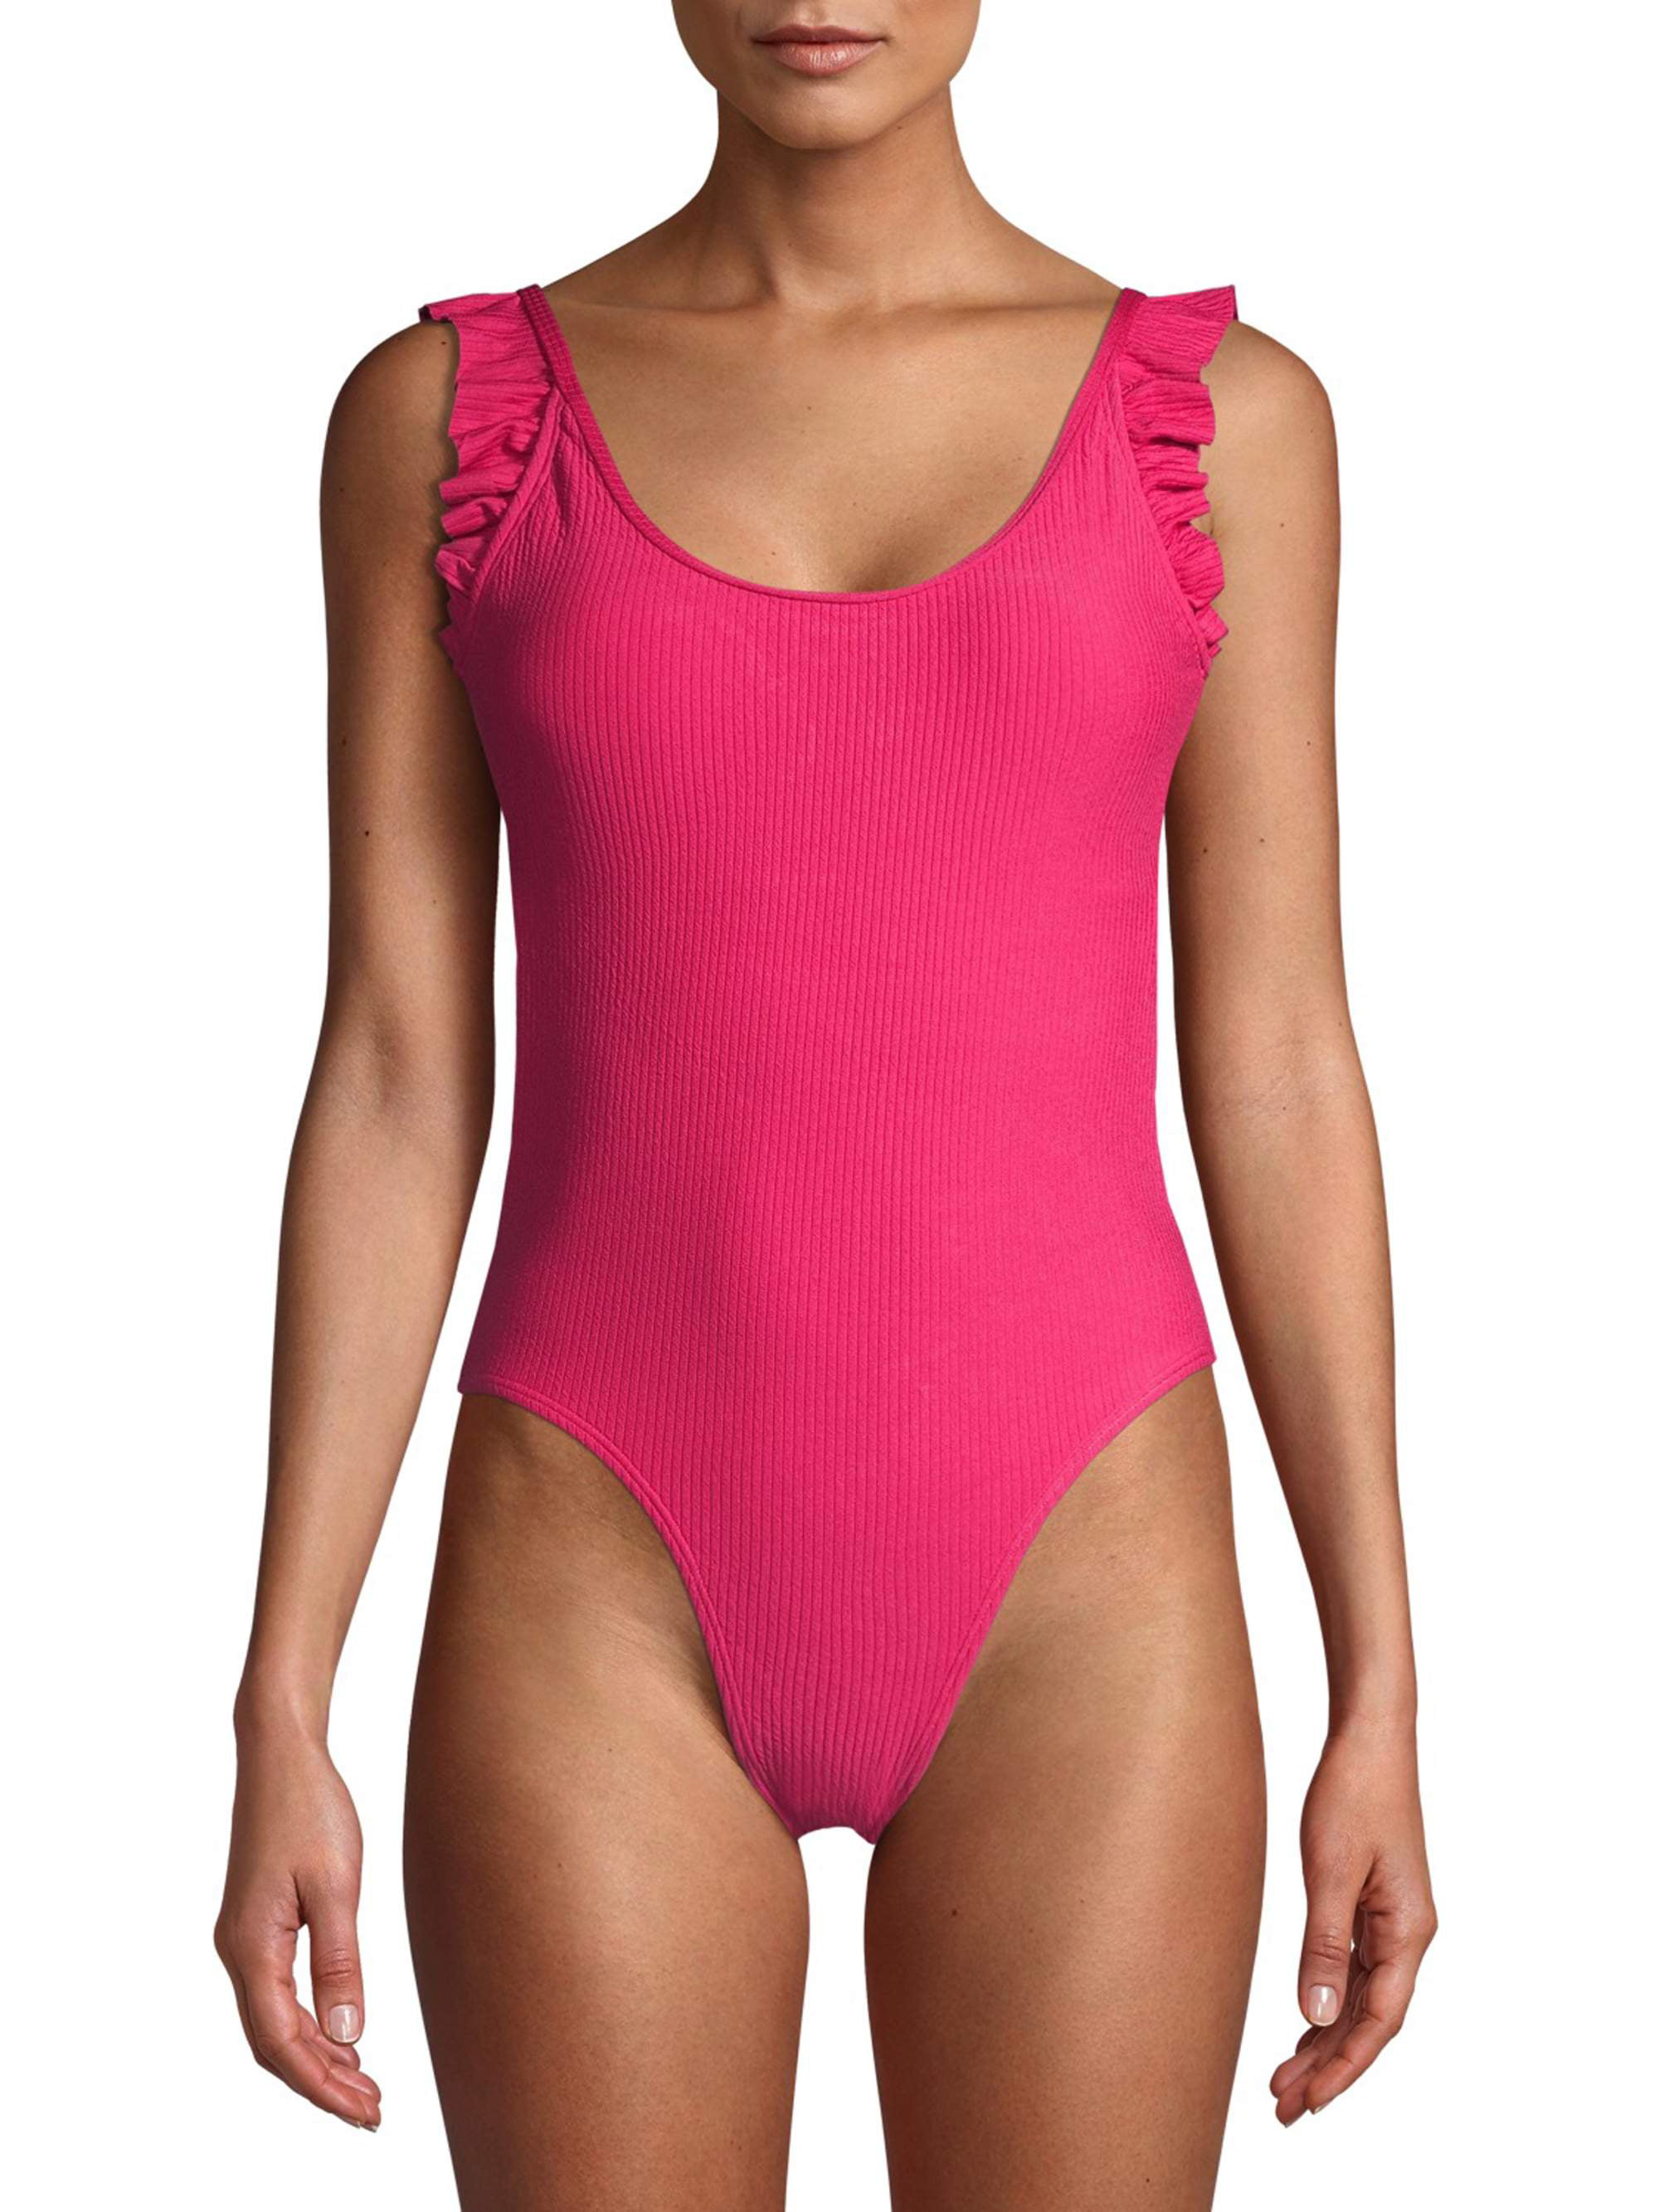 Juicy Couture Womens One-Piece Swimsuit With Ruffle Armhole and